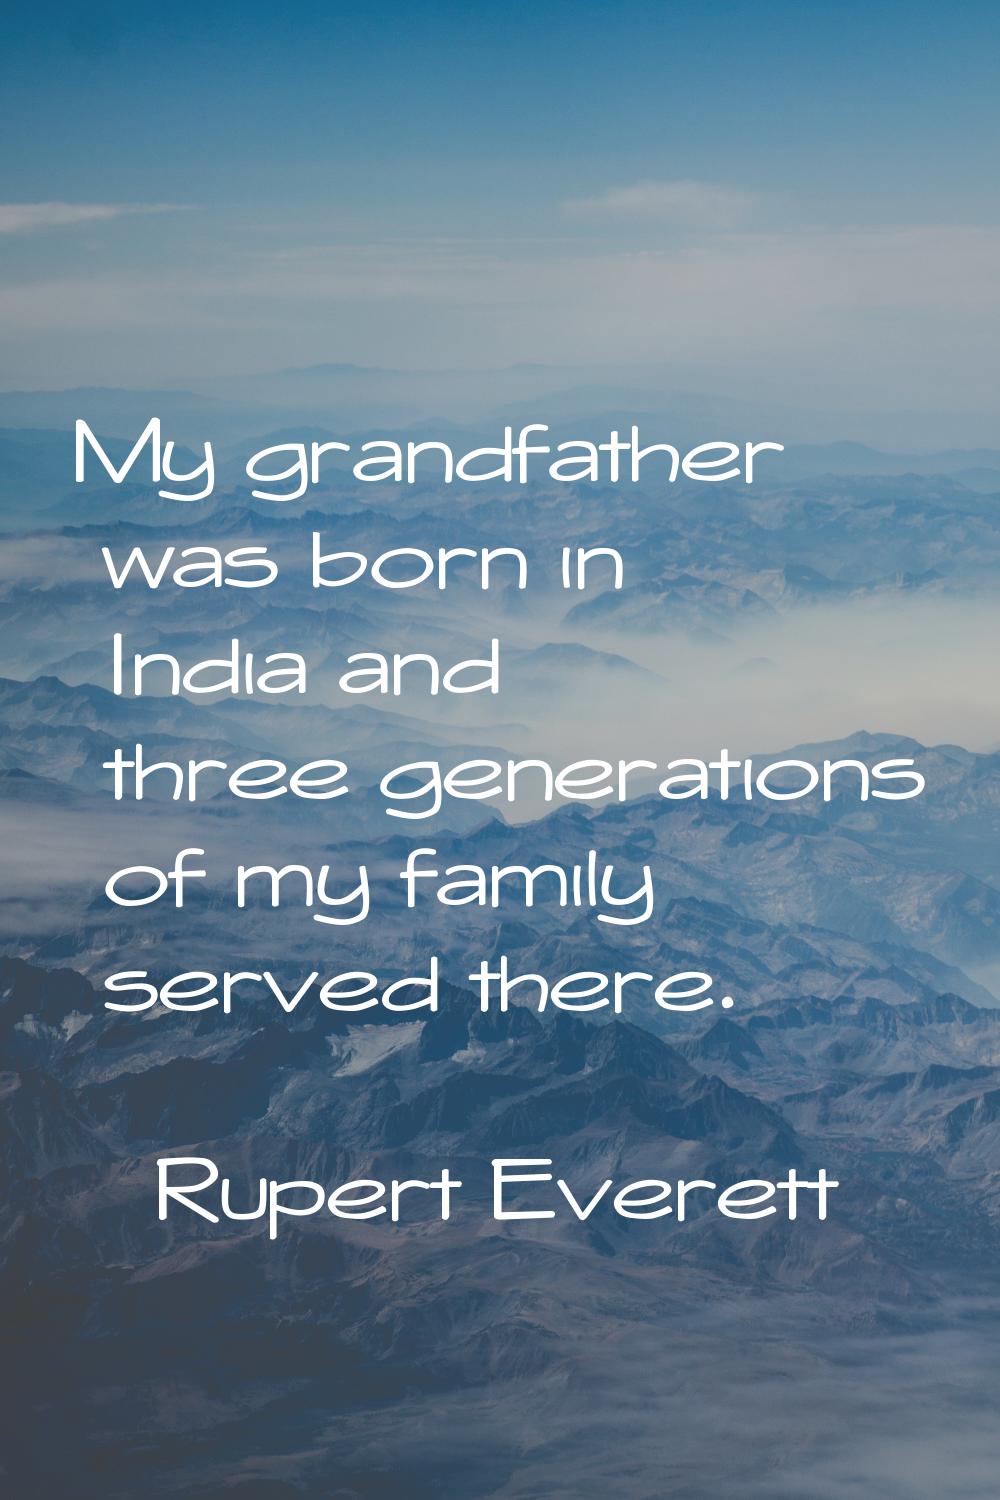 My grandfather was born in India and three generations of my family served there.